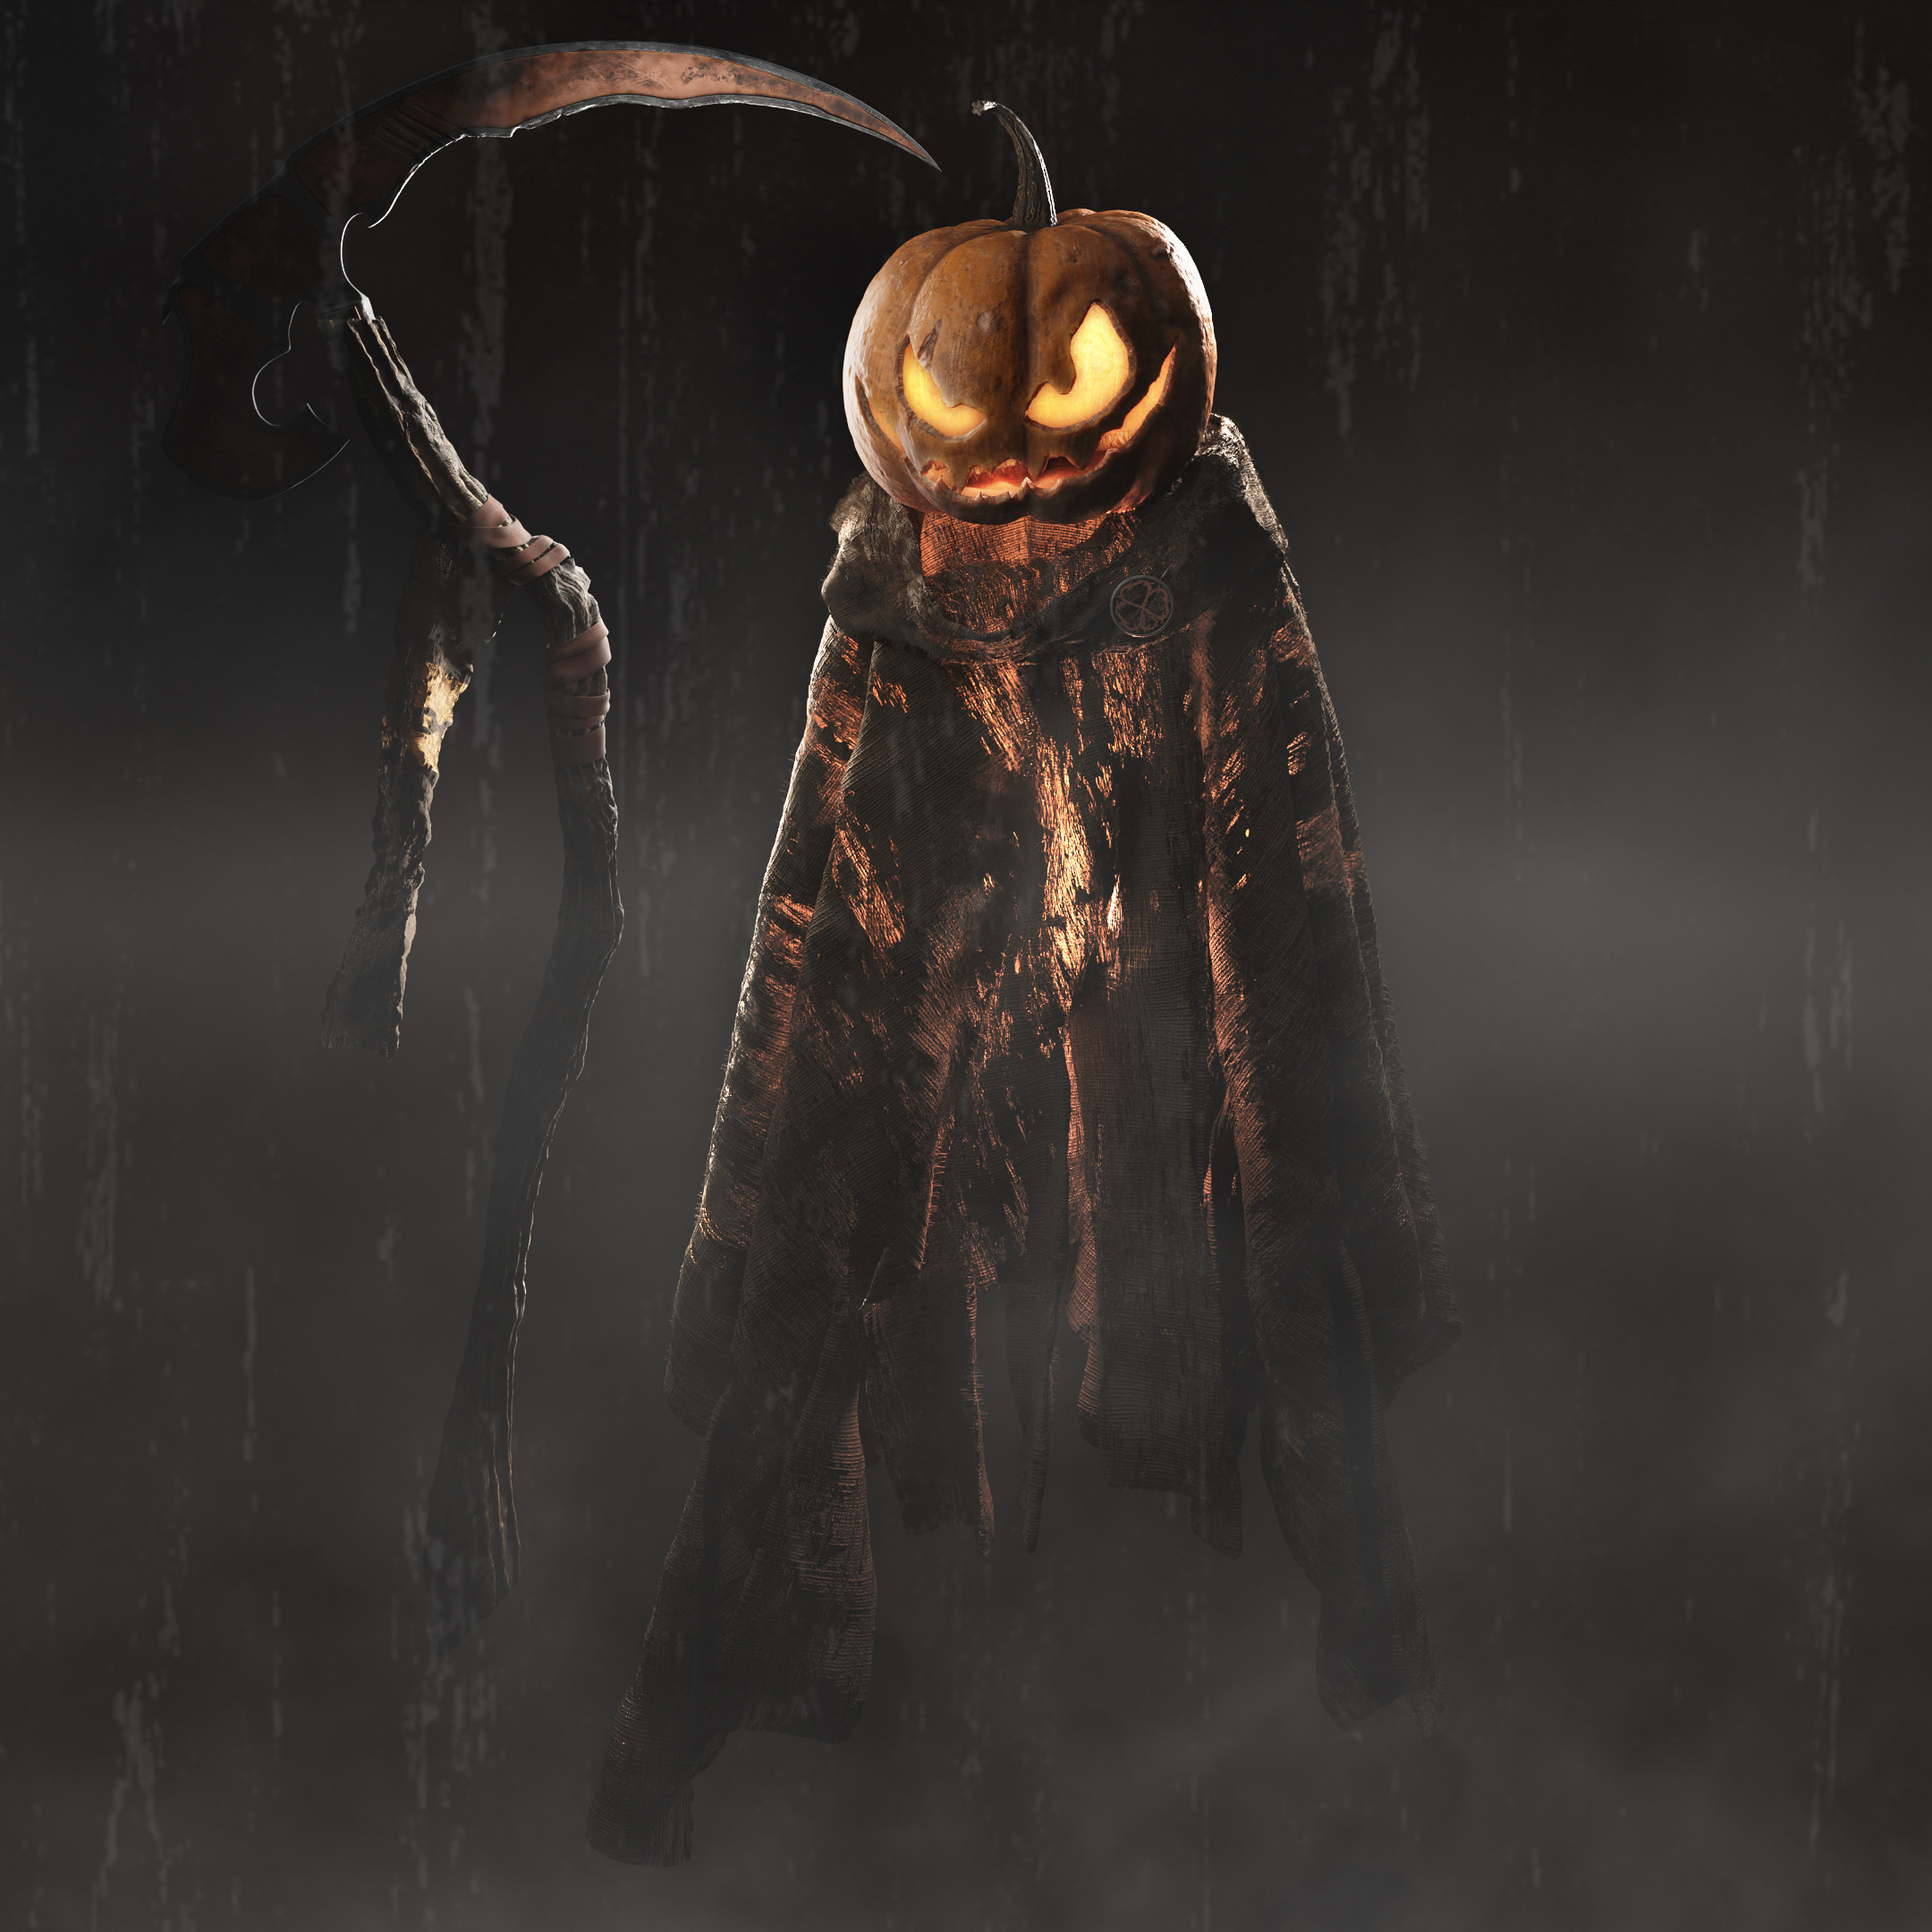 Initial render showcasing the full work in Blender. The fog effects were added in Photoshop, and the cloak was created in two parts using a cloth sim.